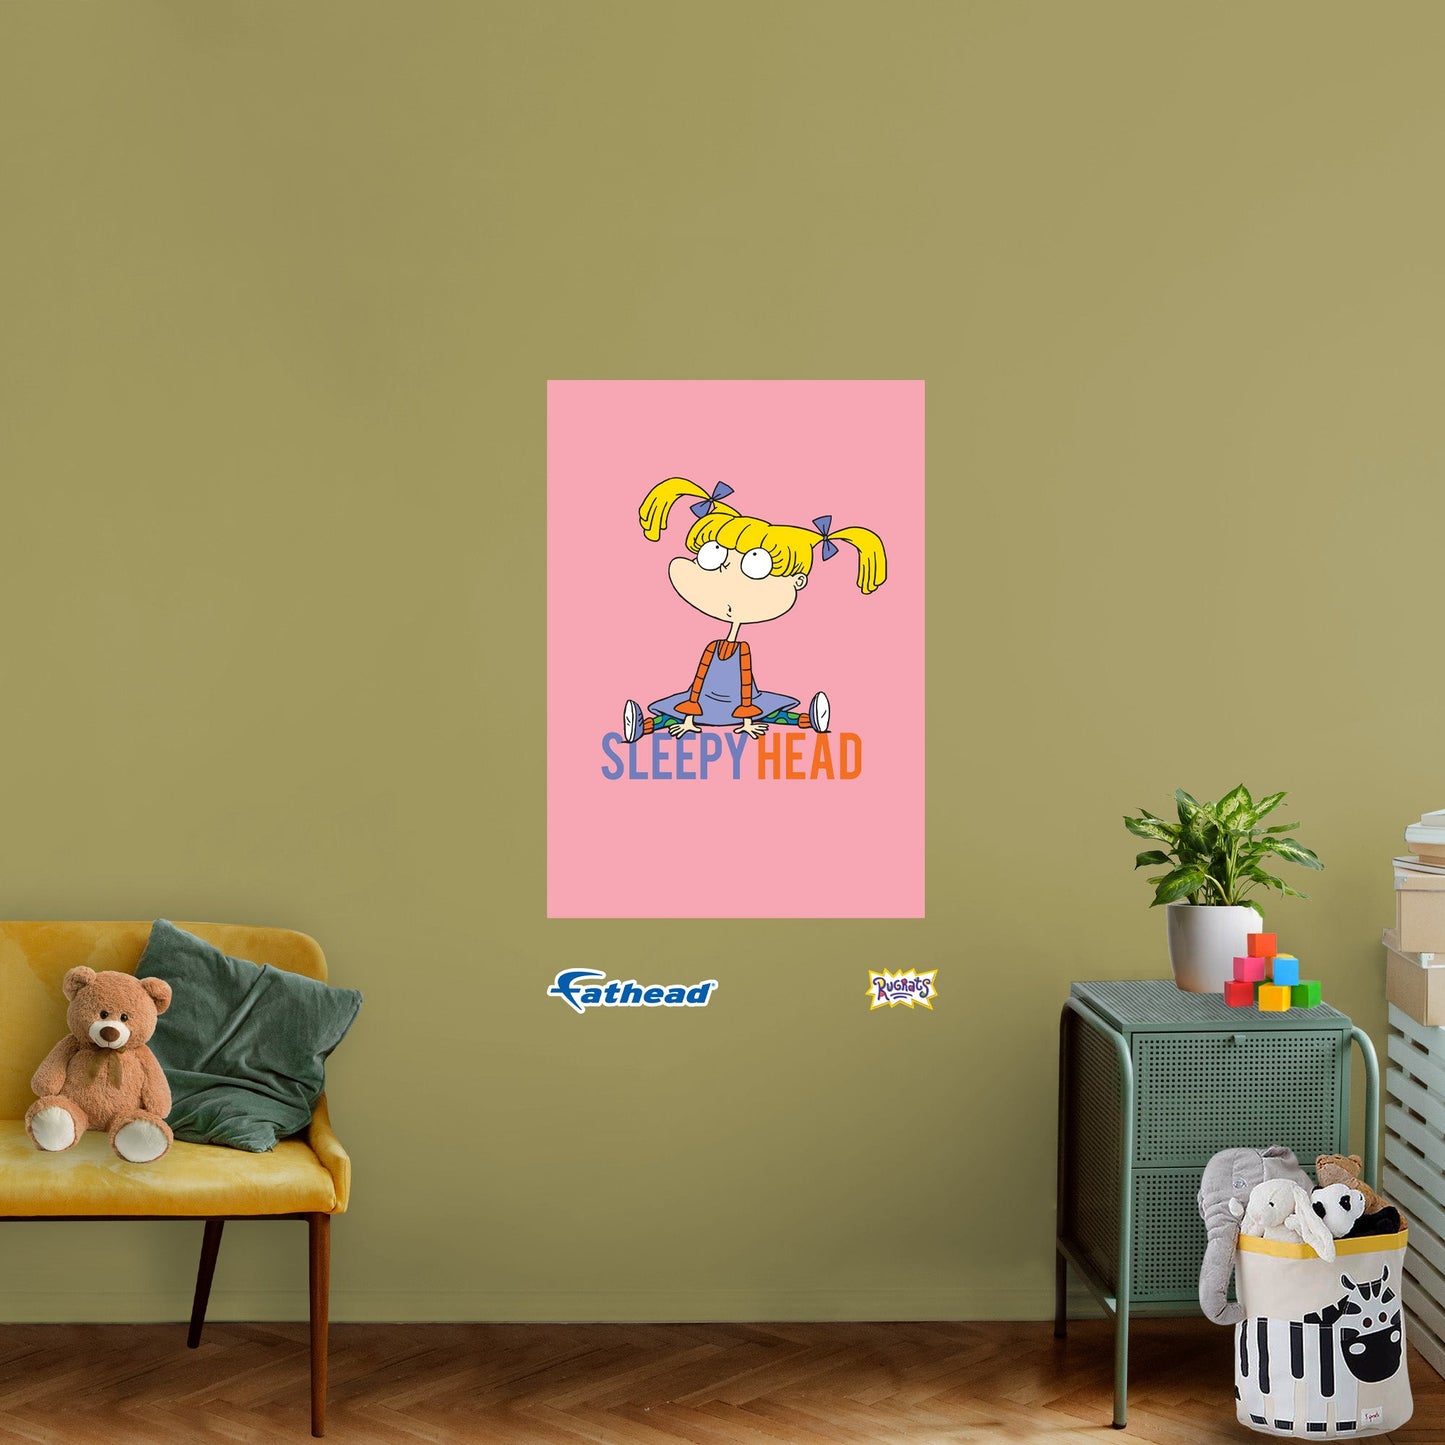 Rugrats: Sleepy Head Poster - Officially Licensed Nickelodeon Removable Adhesive Decal